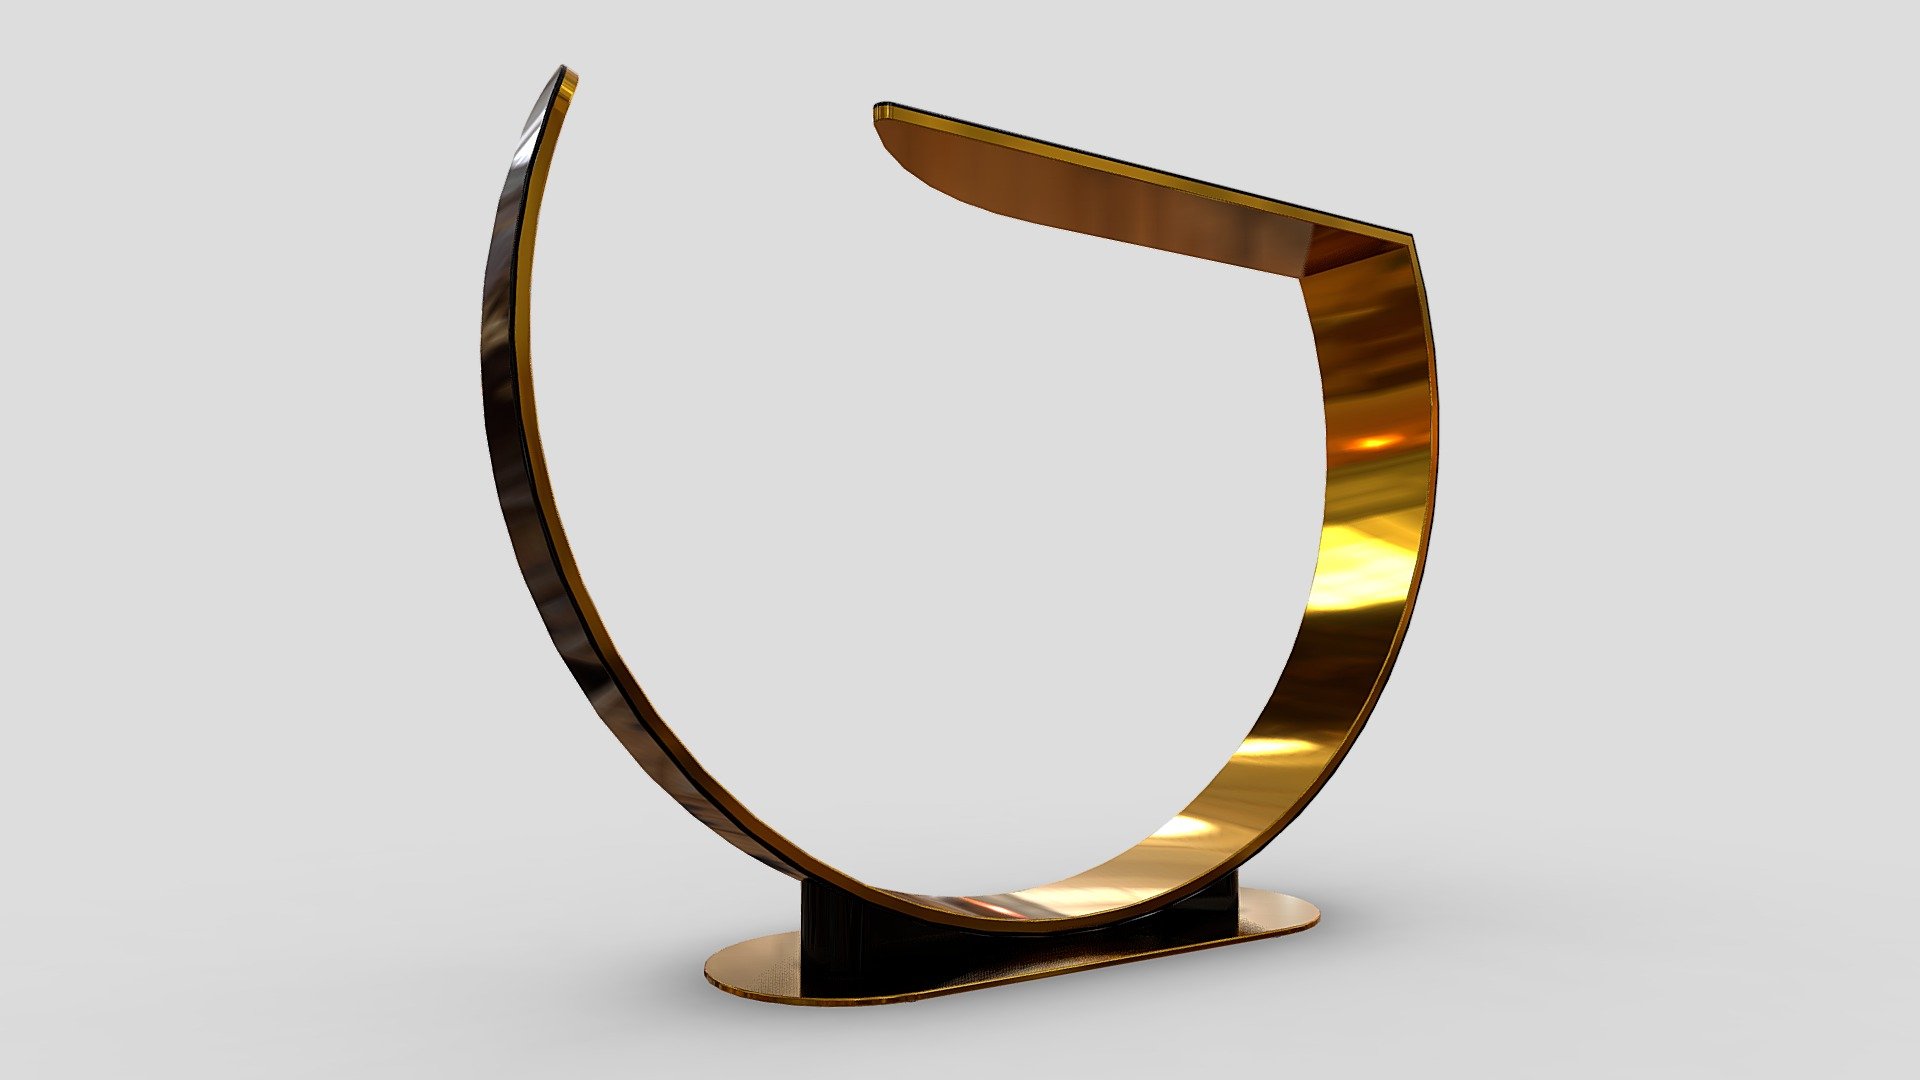 Circle Wave Console in metal with black glossy painted sides. Dimensions: 1125 mm x 300 mm x 905 mm

The model is highly accurate and based on the manufacturers original dimensions and technical data 3d model